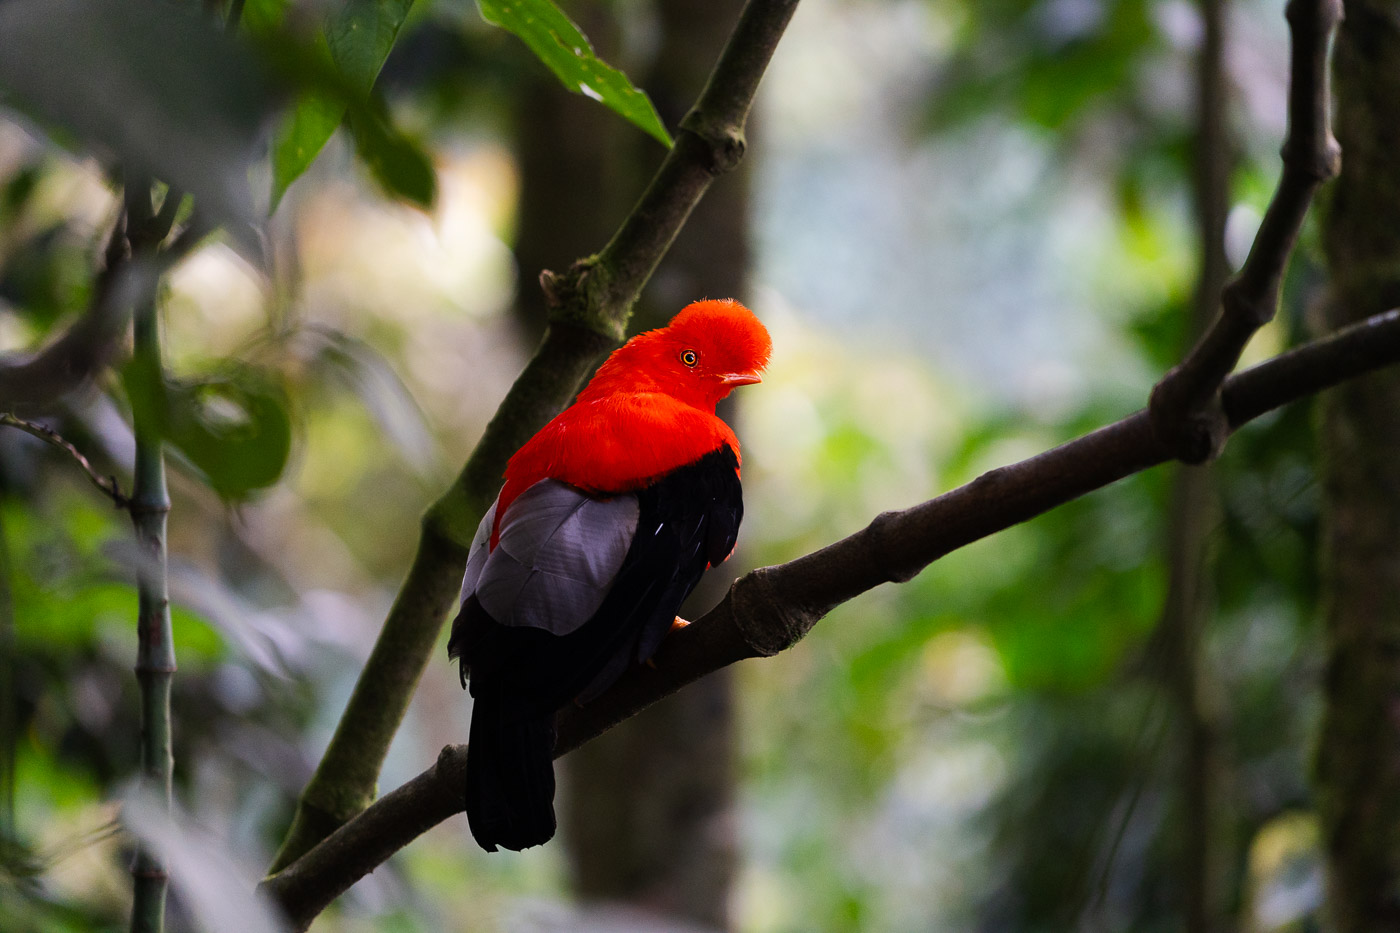 A red and black Andean Cock of the Rock bird perched on a branch in the forest looking at the camera.